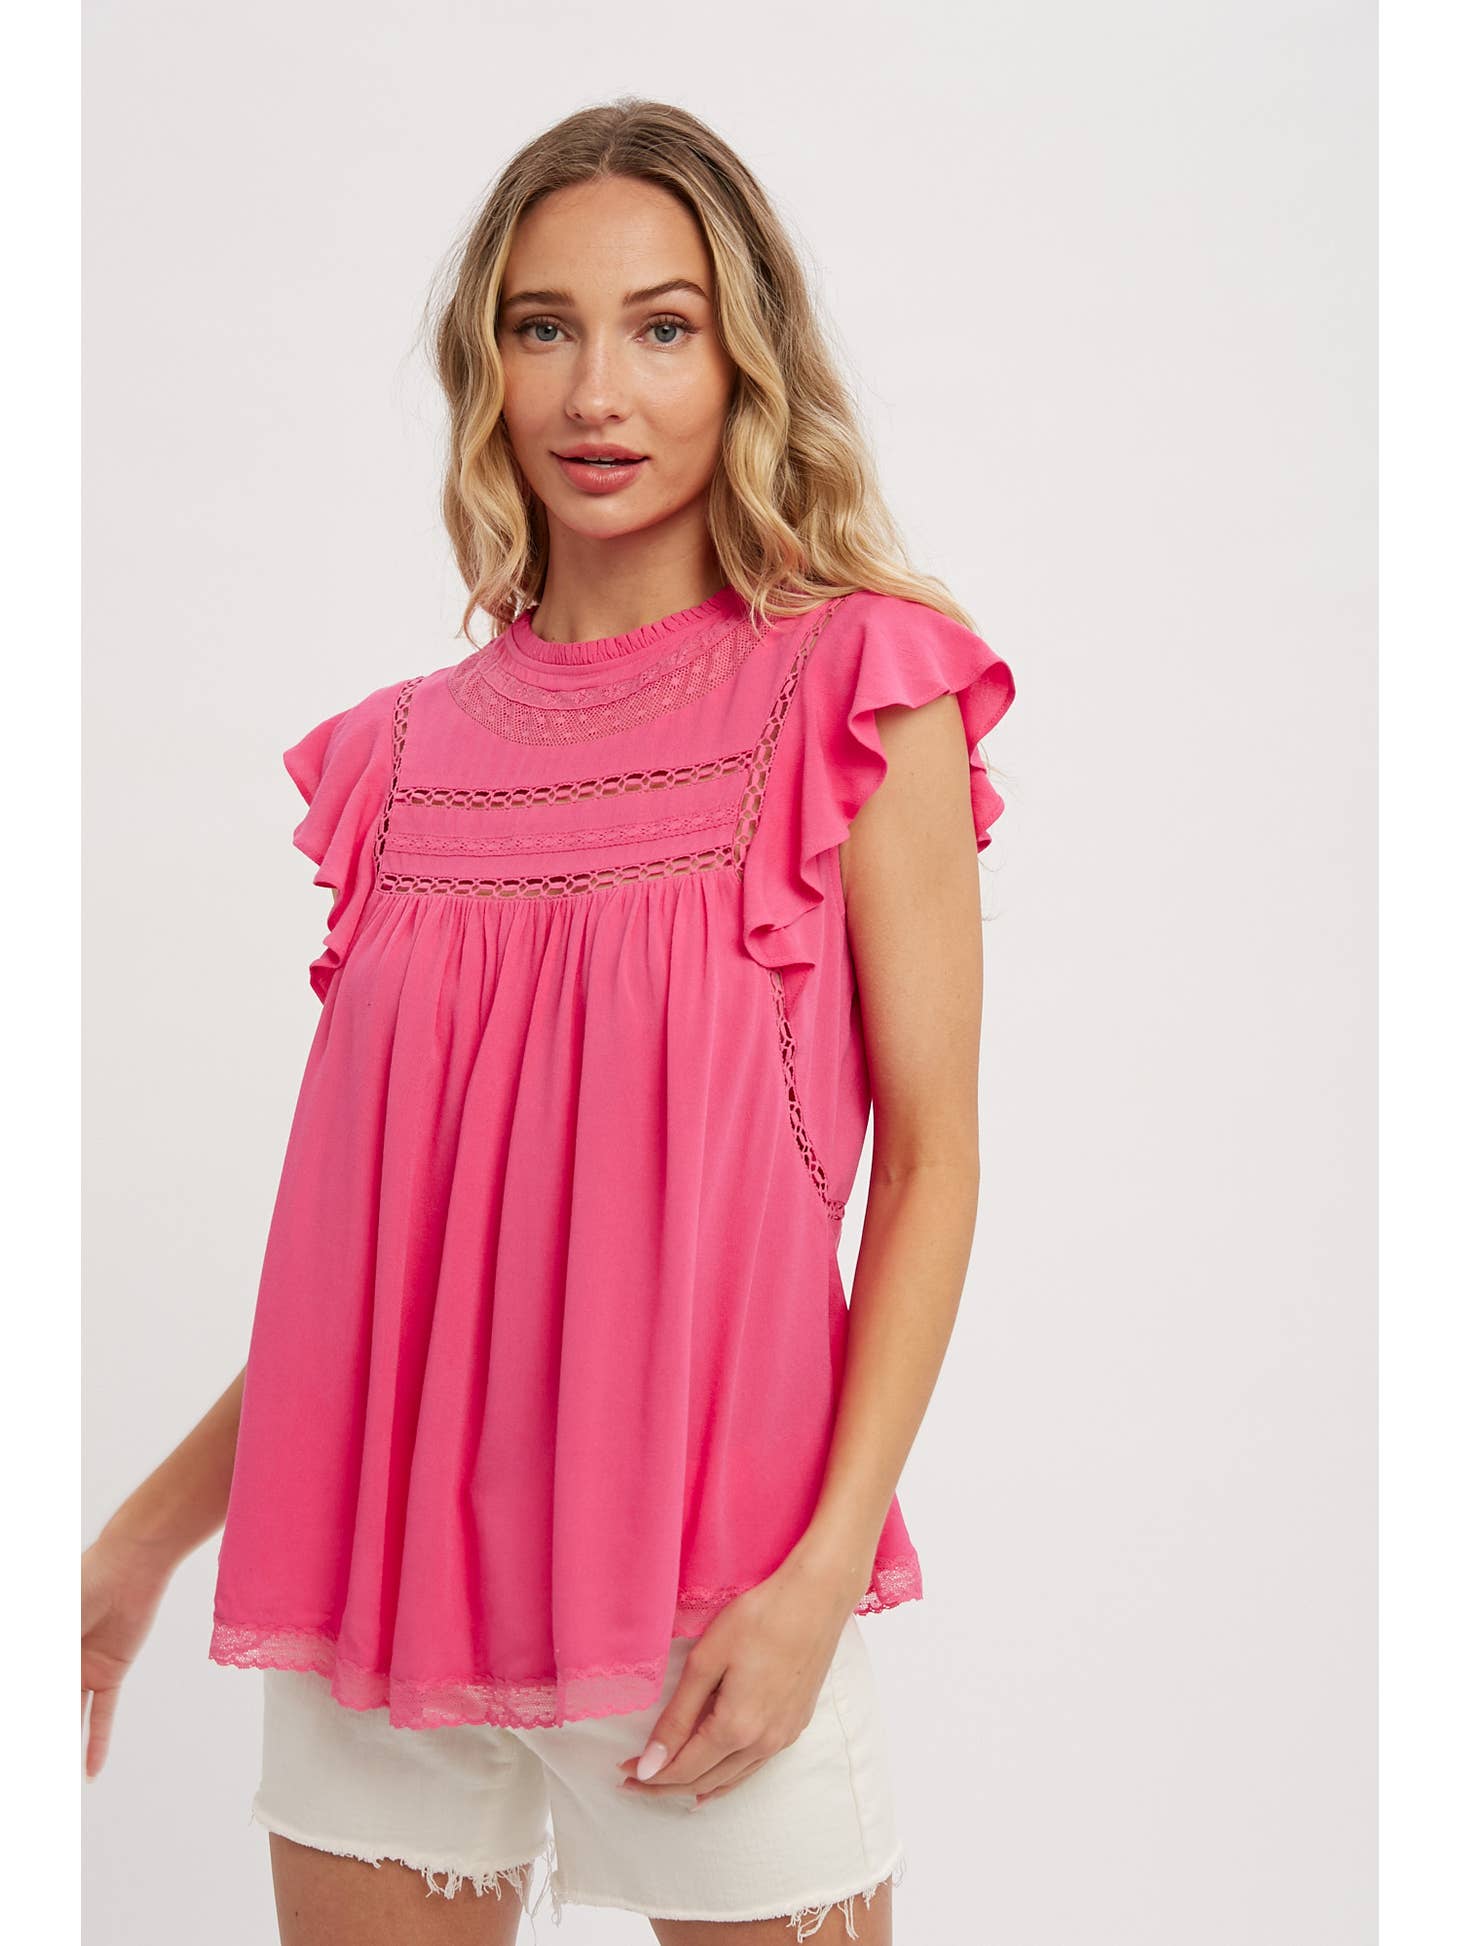 Relaxed Fit Baby Doll Top